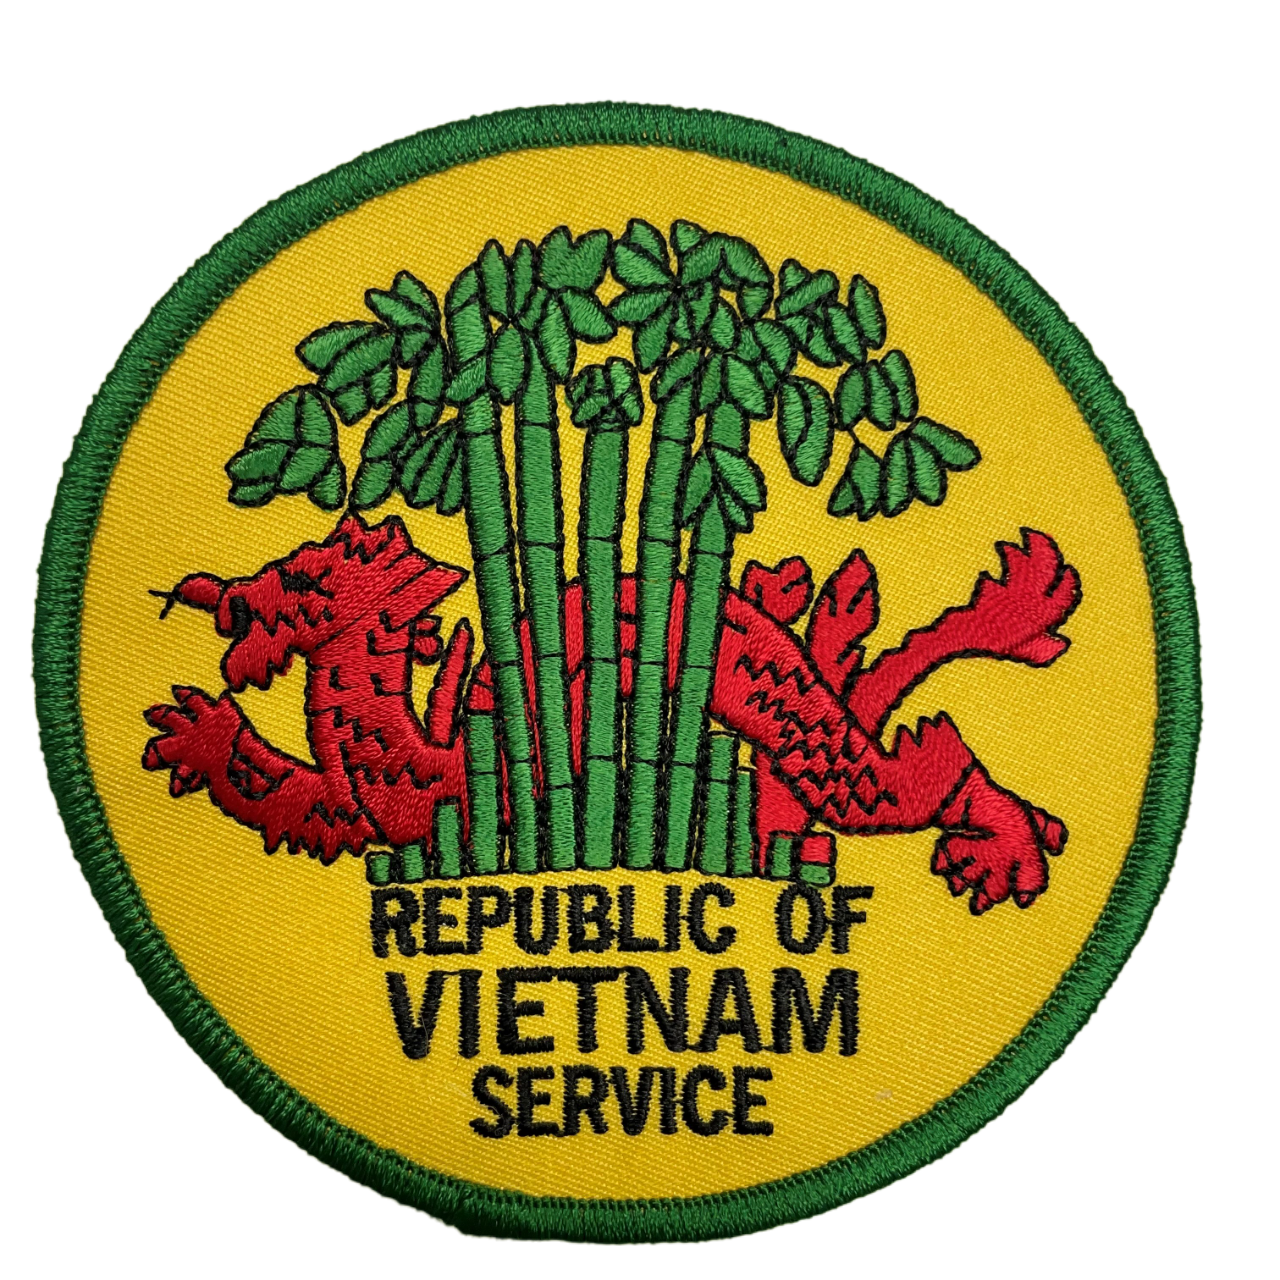 Republic of Vietnam Service - Defined Dragon - Sew-On Patch